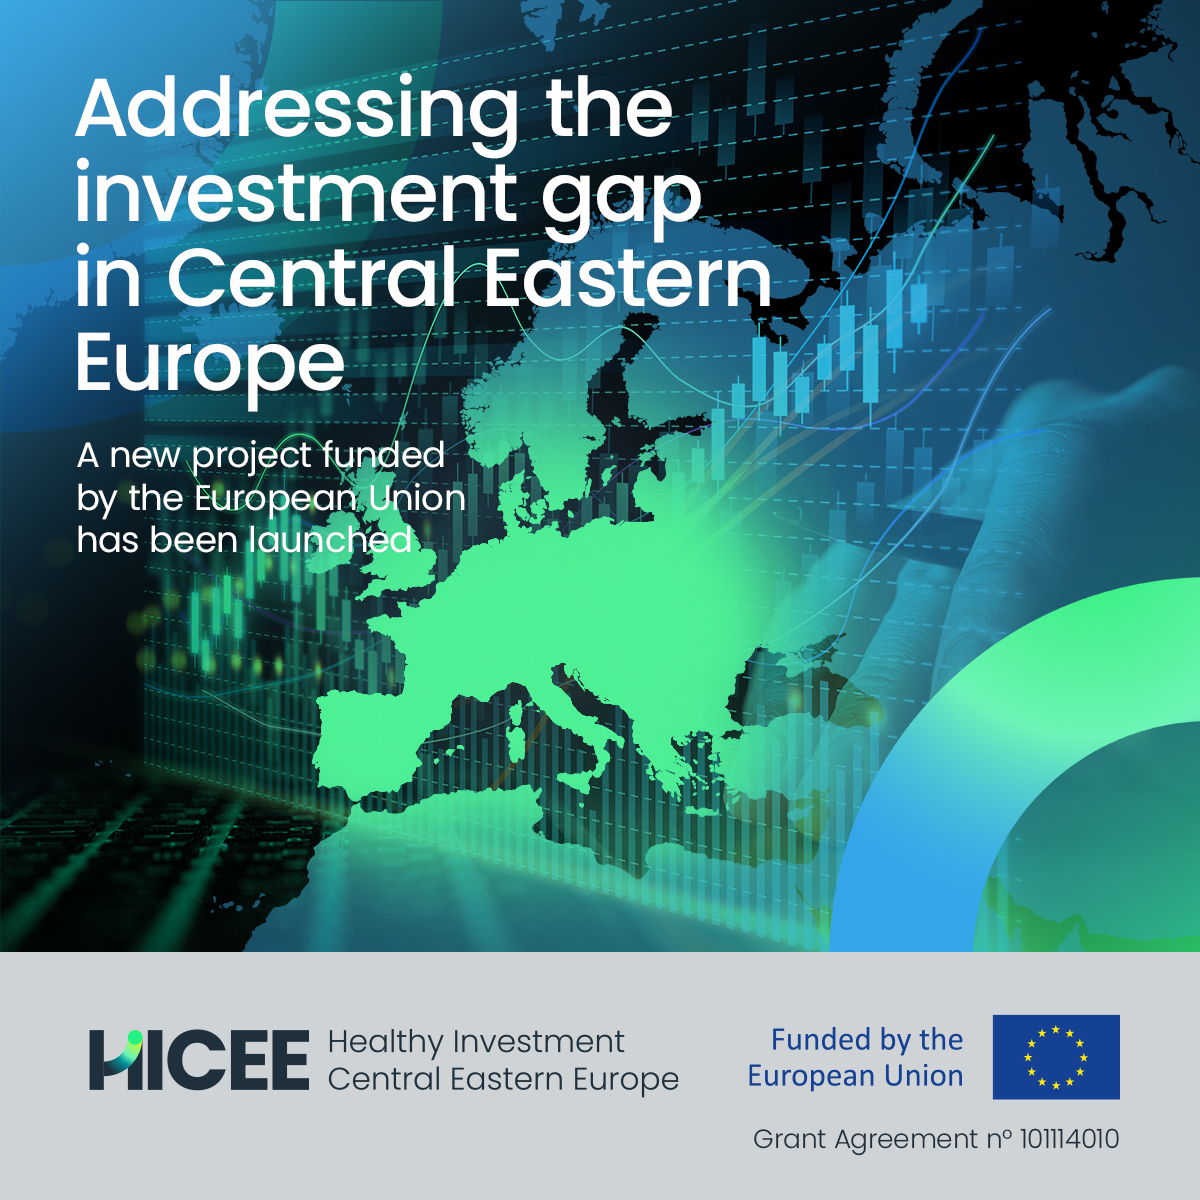 HICEE_Addressing the investment gap_1200x1200px_v6 - Copy